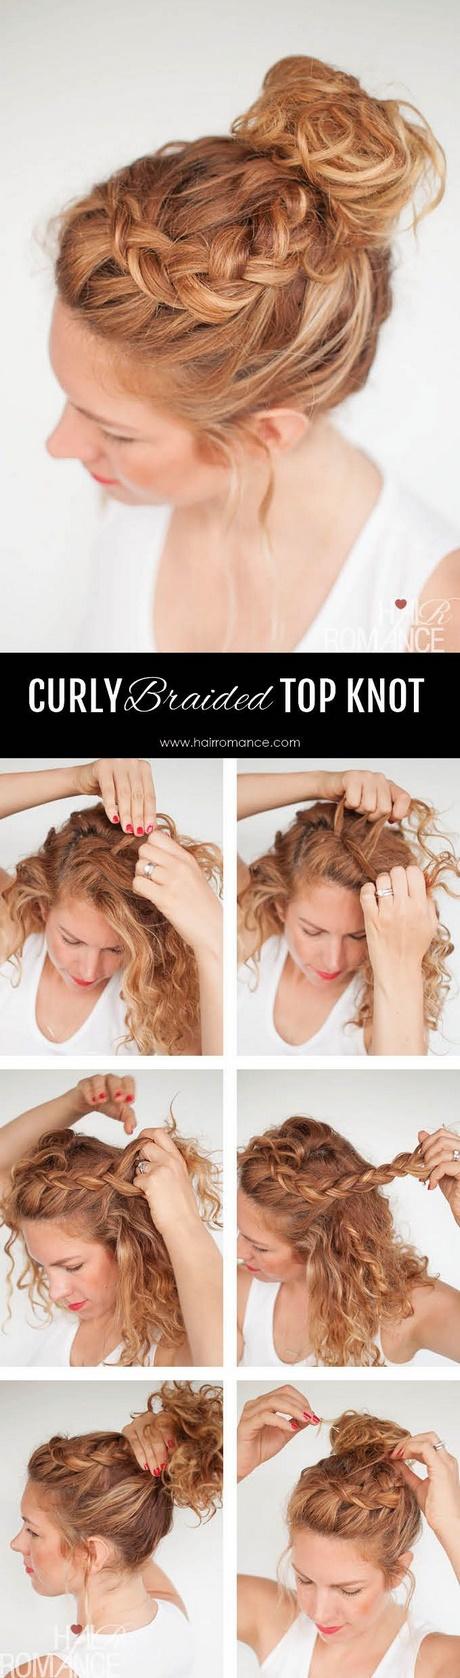 Simple daily hairstyles for curly hair simple-daily-hairstyles-for-curly-hair-03_16